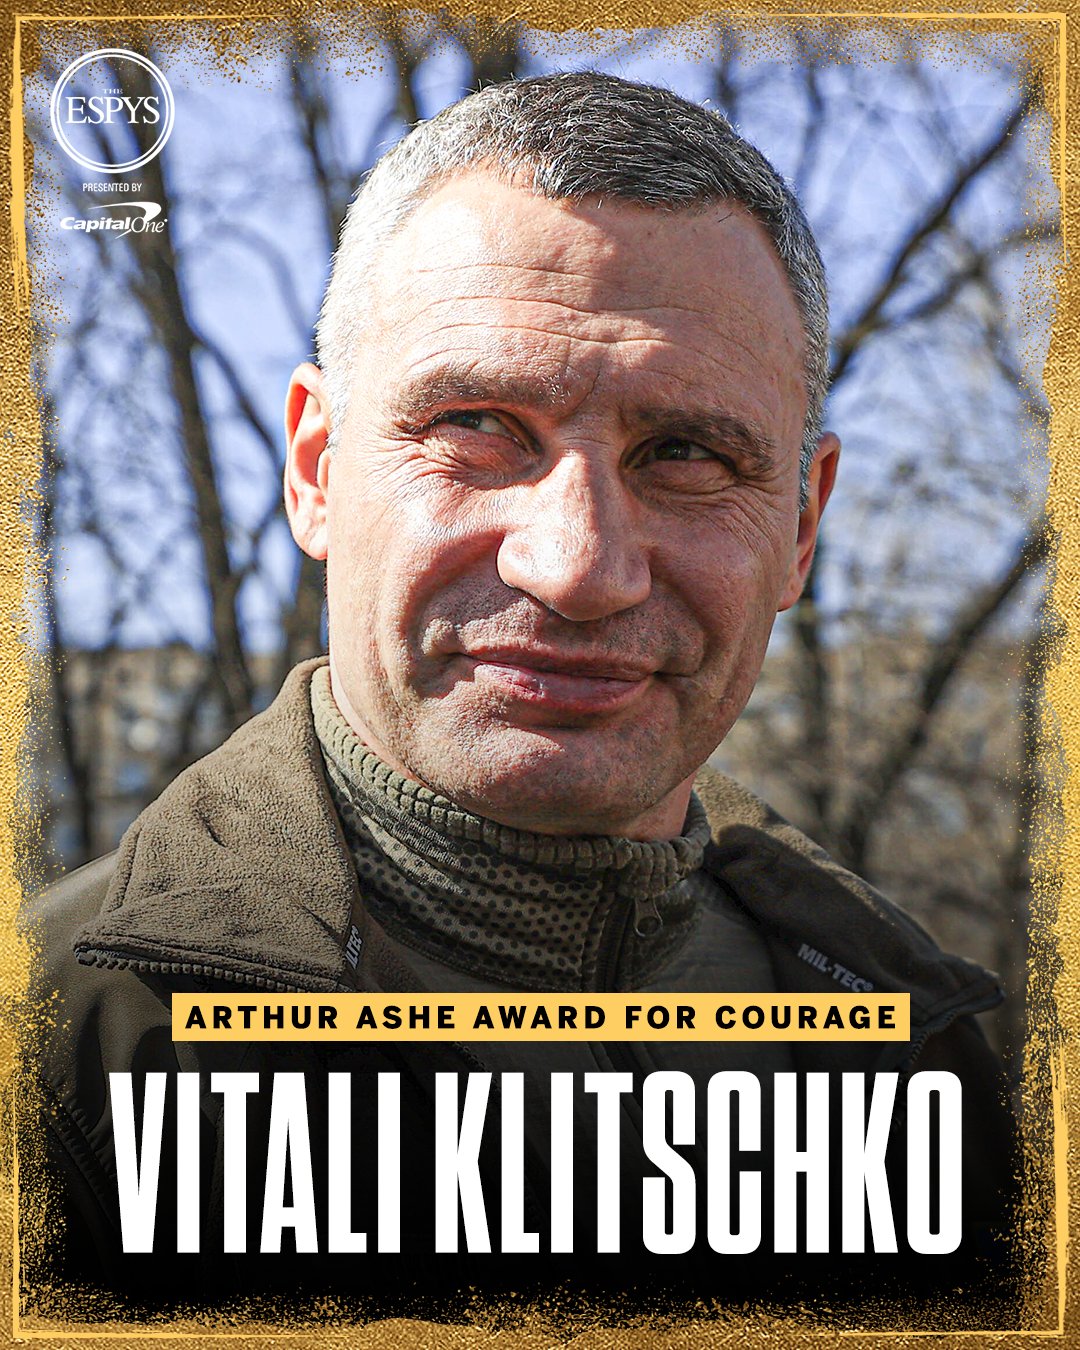 Vitali Klitschko will be honored with the Arthur Ashe Courage Award